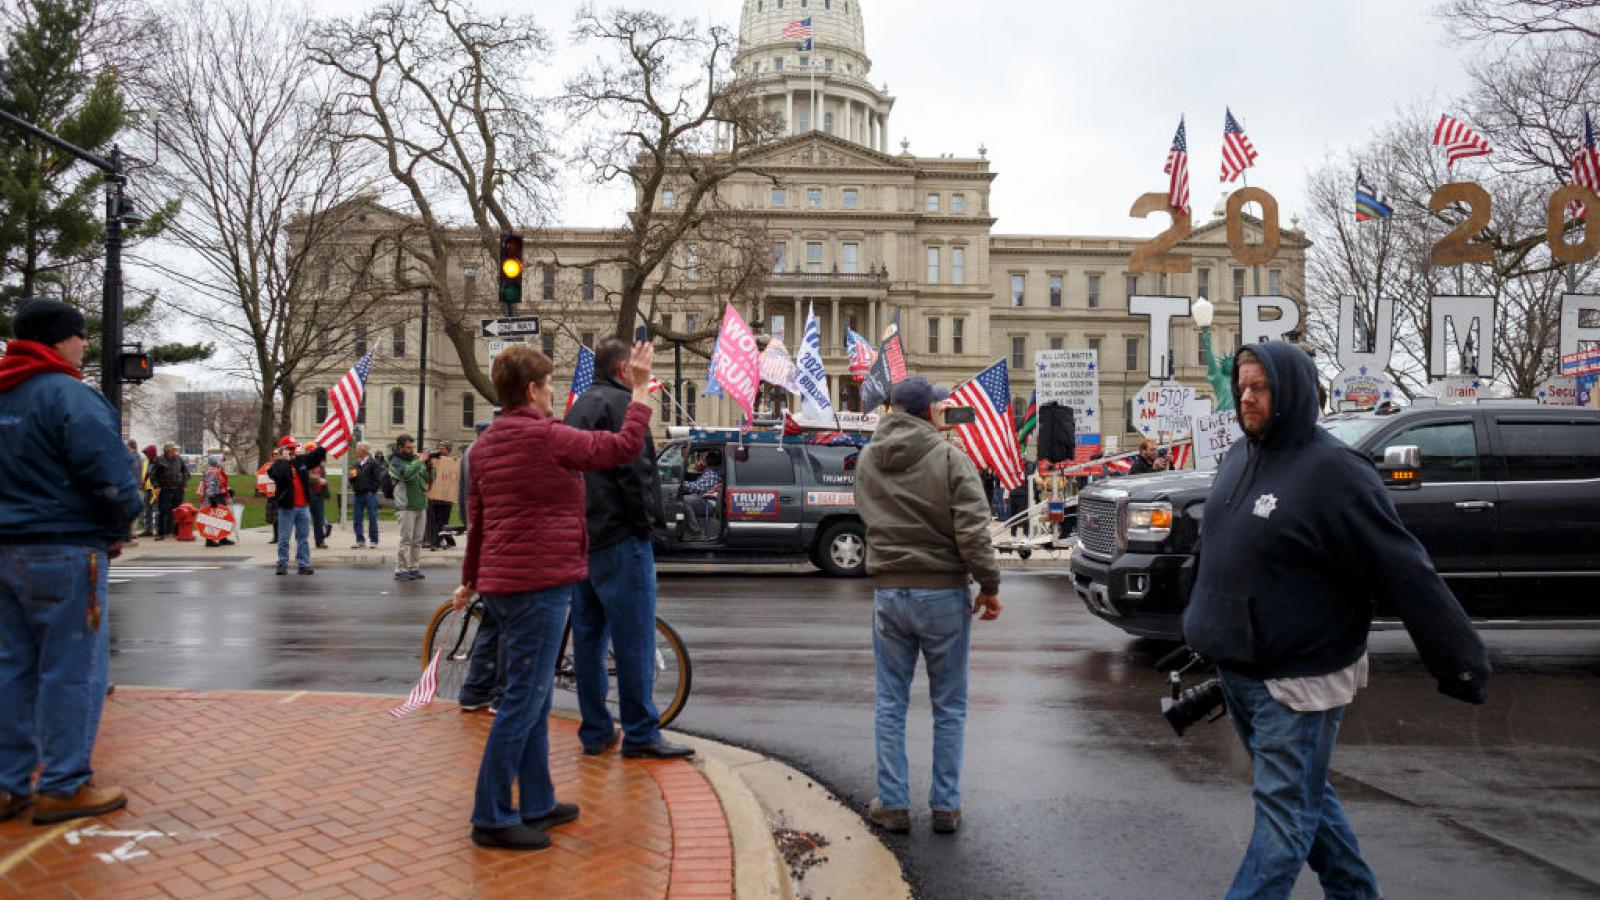 "Operation Gridlock" Thousands protest Michigan governor's lockdown